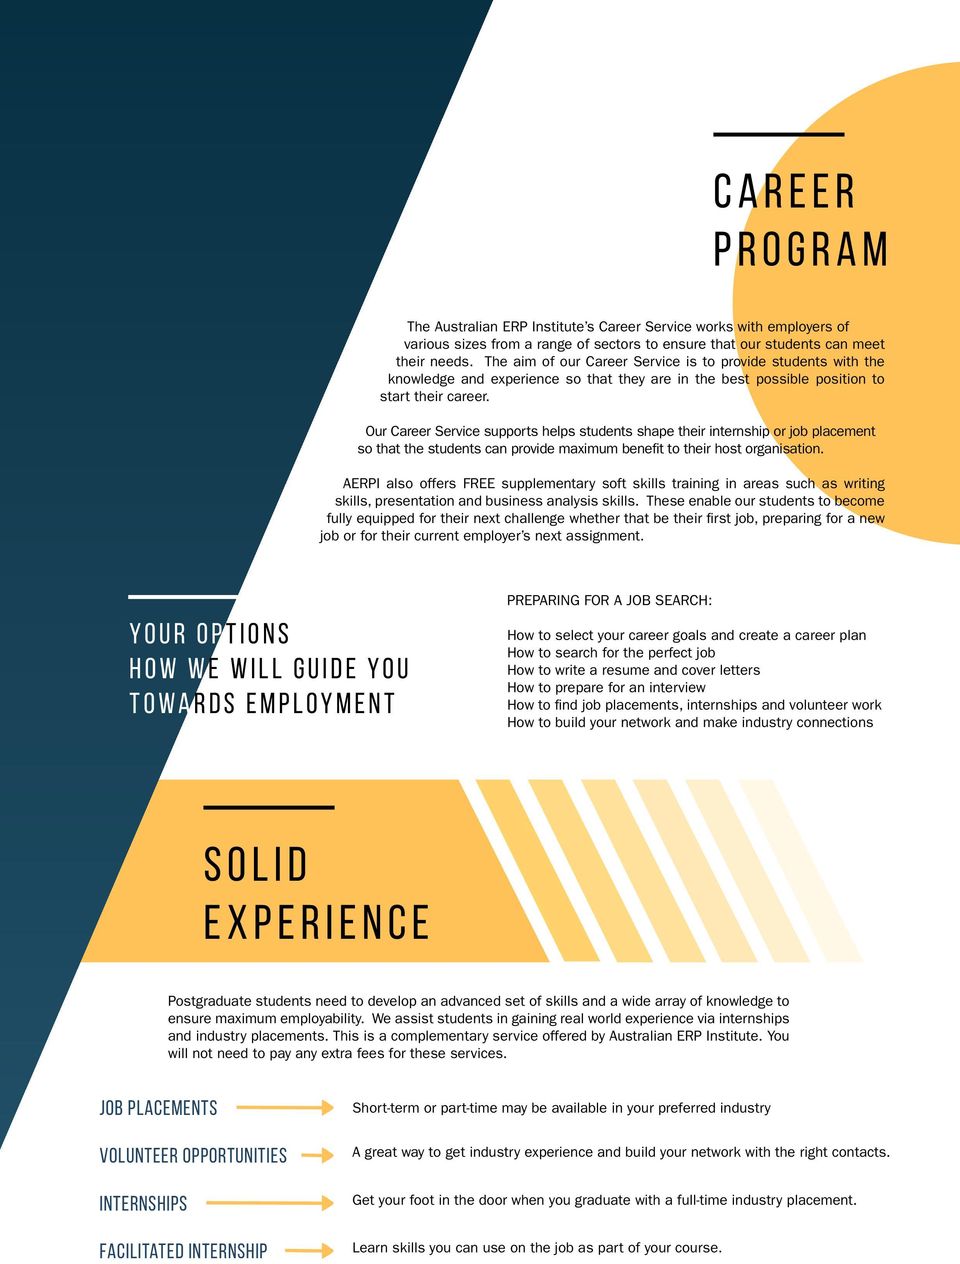 Our Career Service supports helps students shape their internship or job placement so that the students can provide maximum benefit to their host organisation.